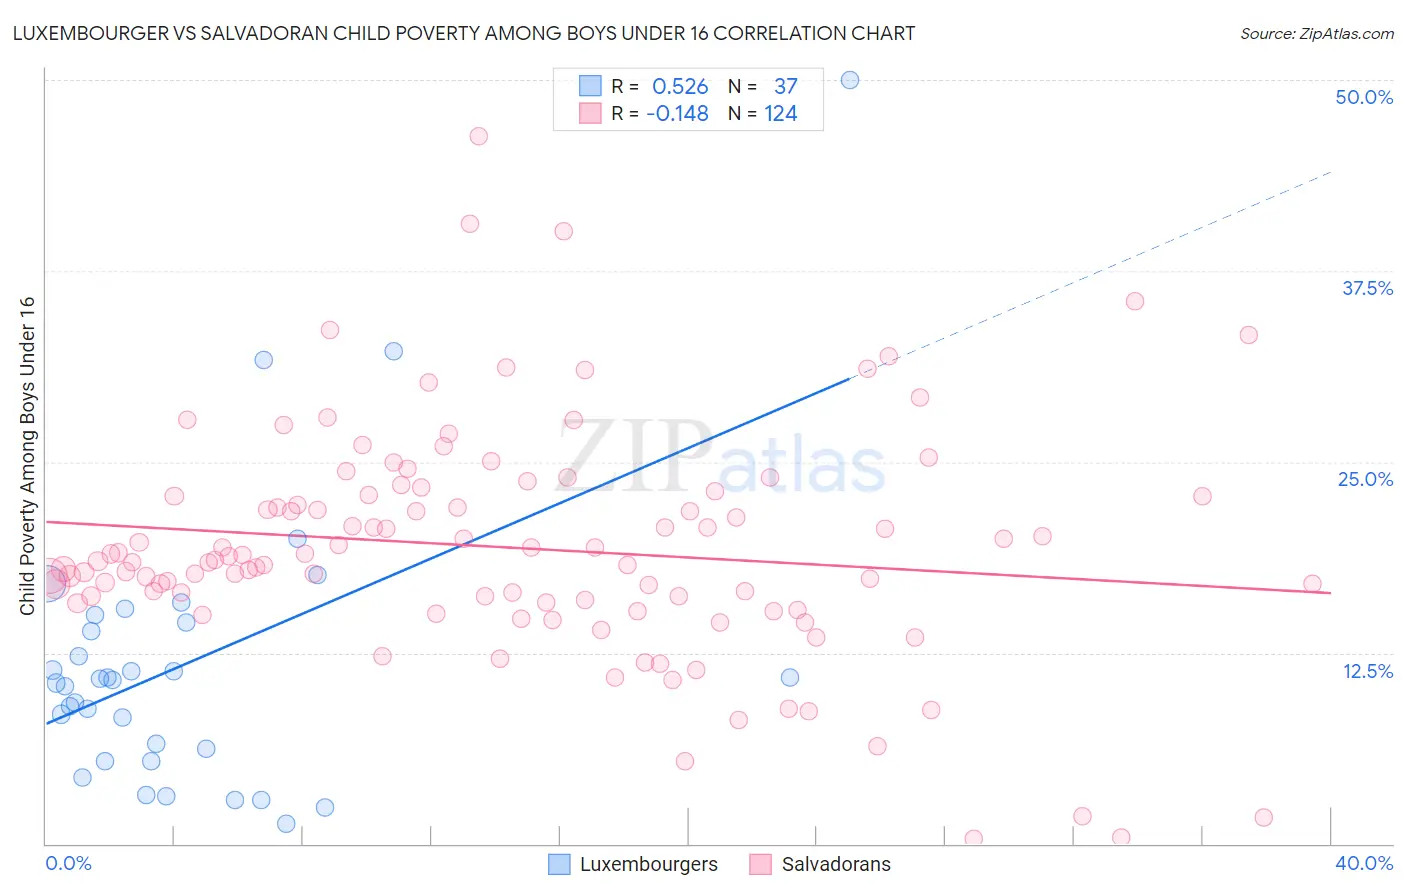 Luxembourger vs Salvadoran Child Poverty Among Boys Under 16